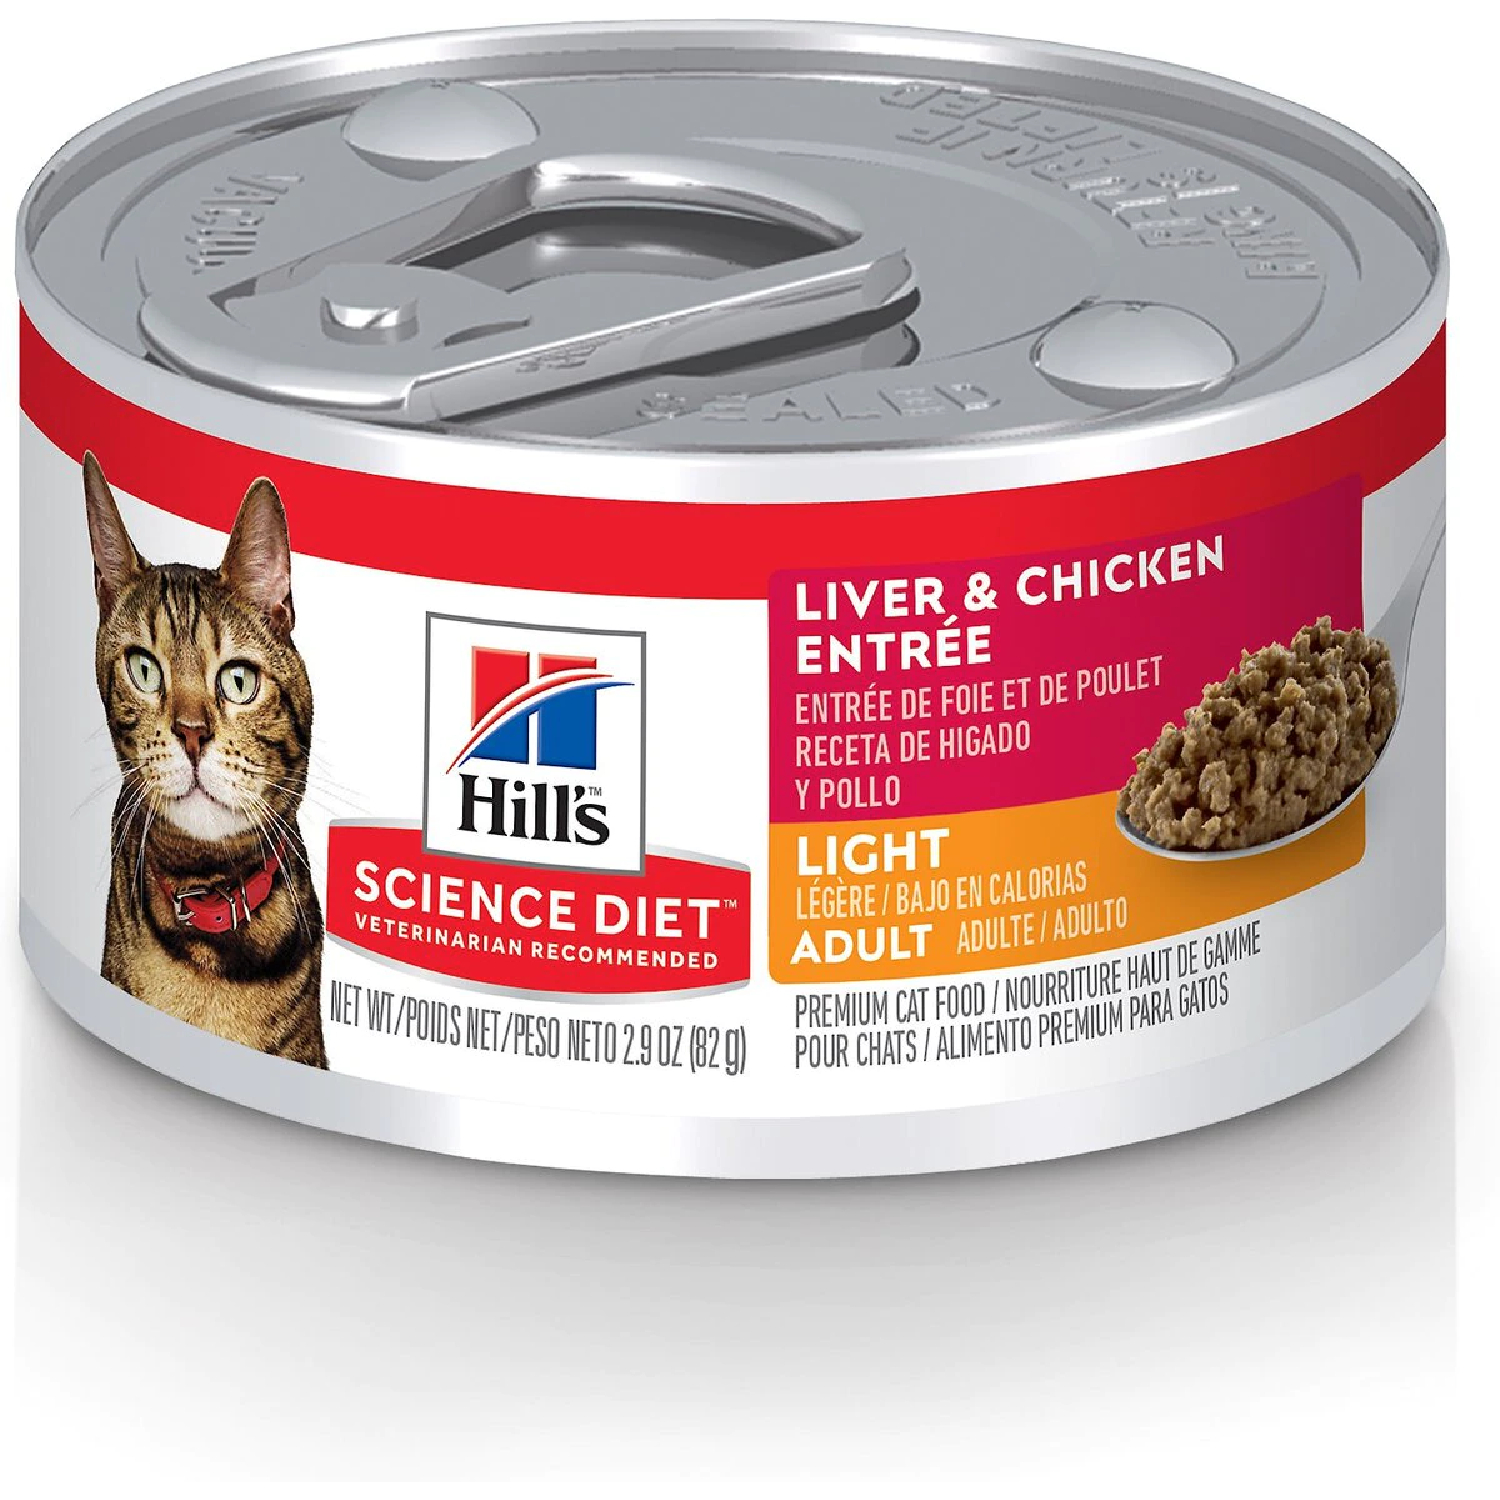 Hill’s Science Diet Adult Light Liver & Chicken Entrée Canned Cat Food